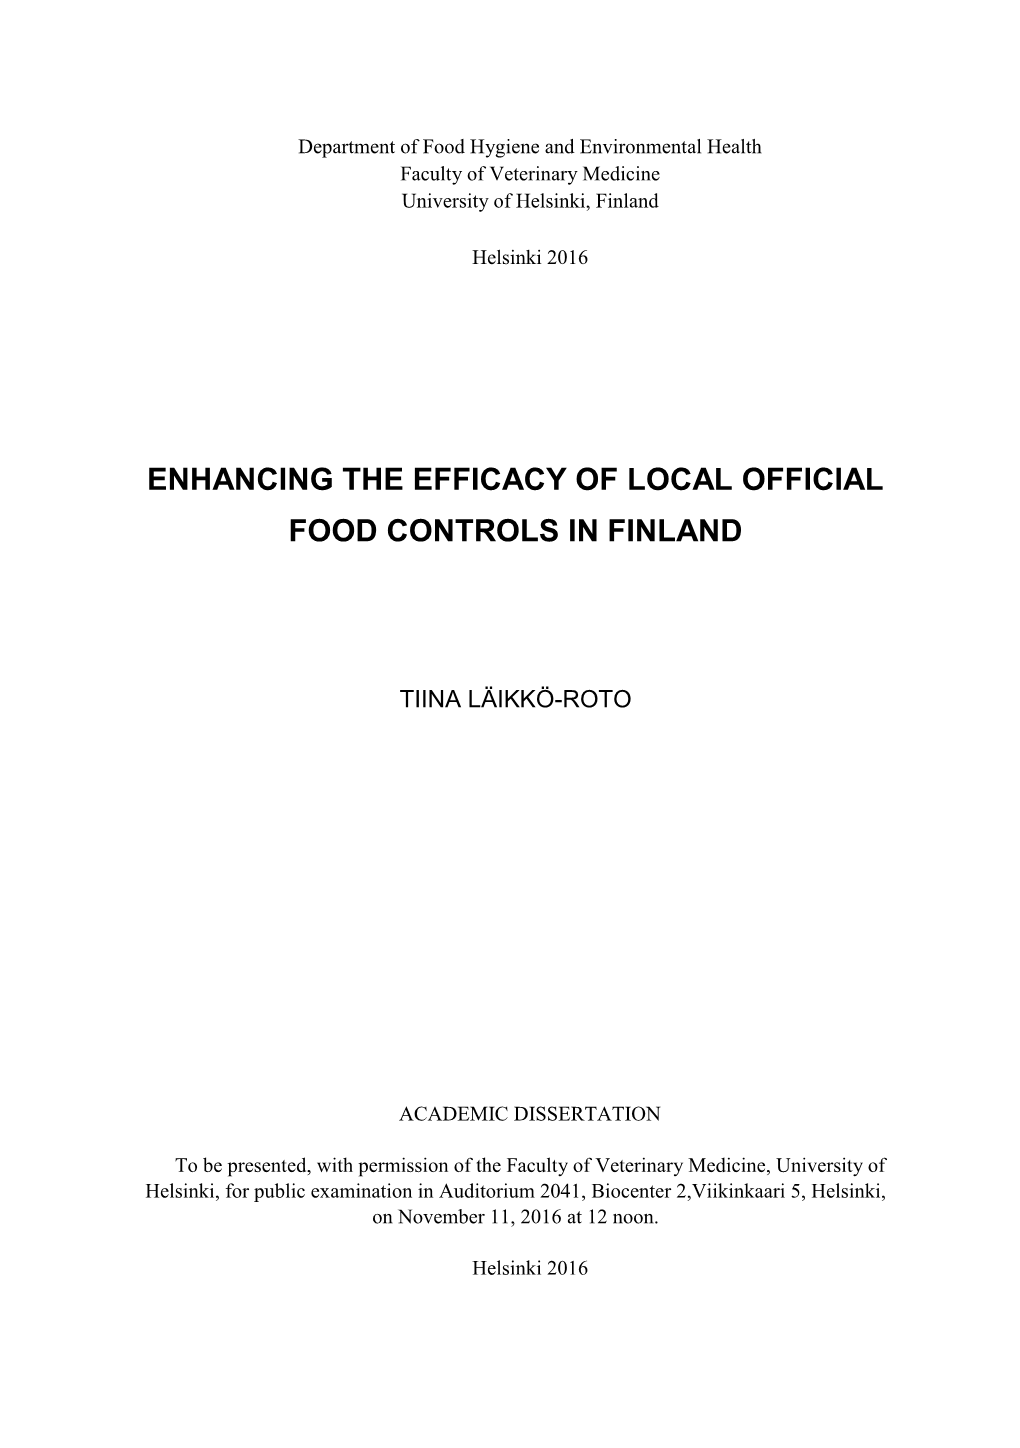 Enhancing the Efficacy of Local Official Food Controls in Finland